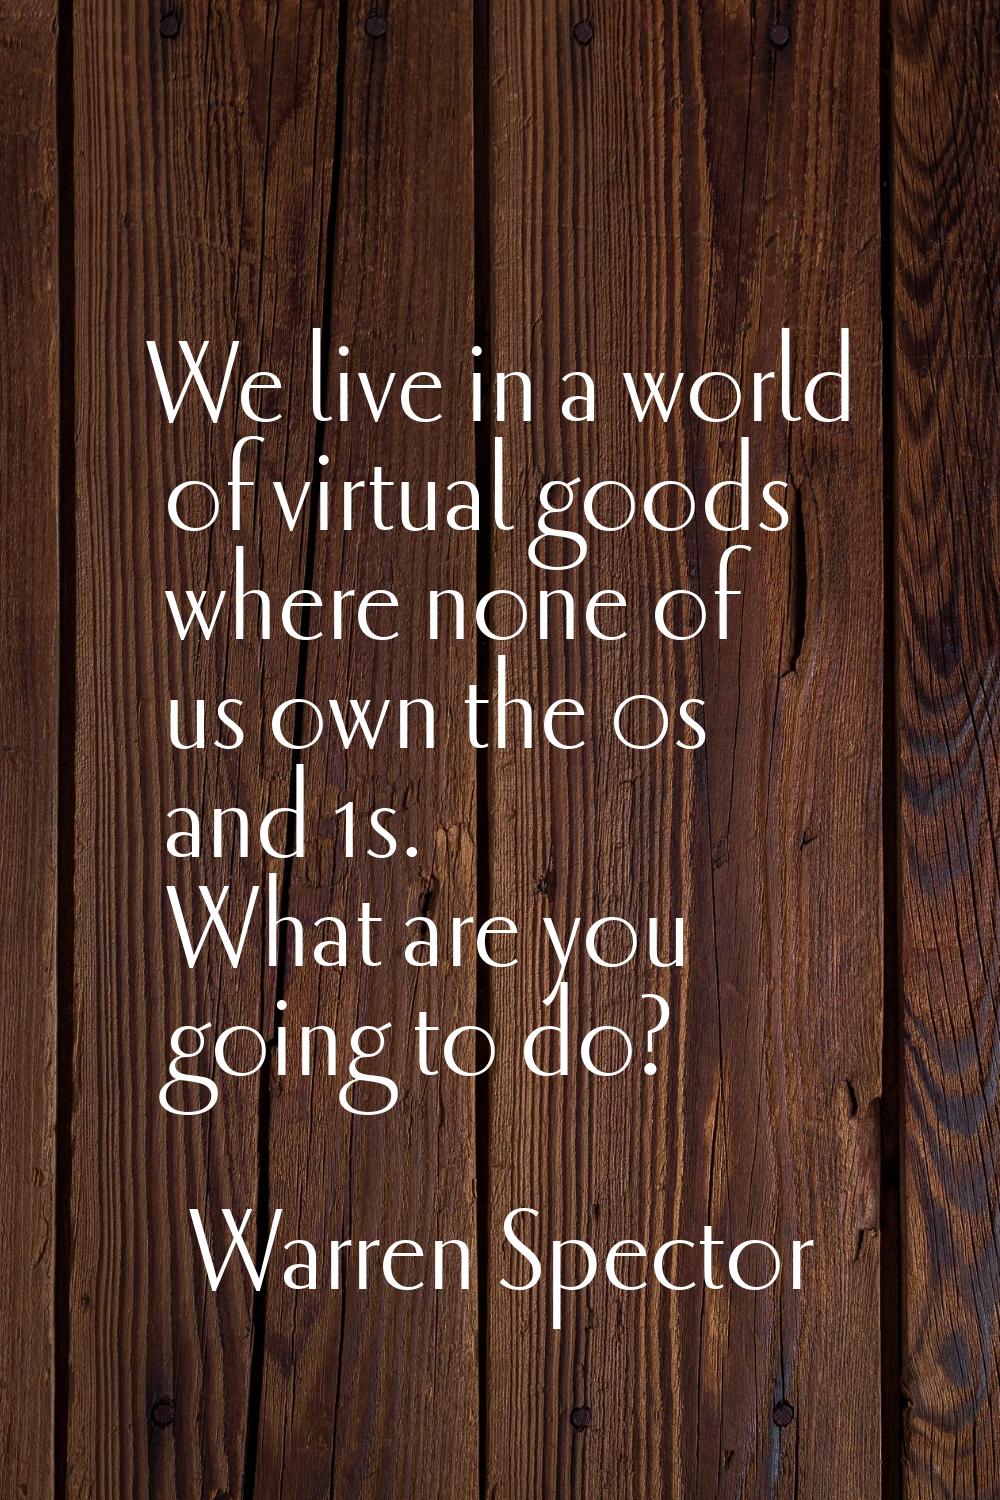 We live in a world of virtual goods where none of us own the 0s and 1s. What are you going to do?